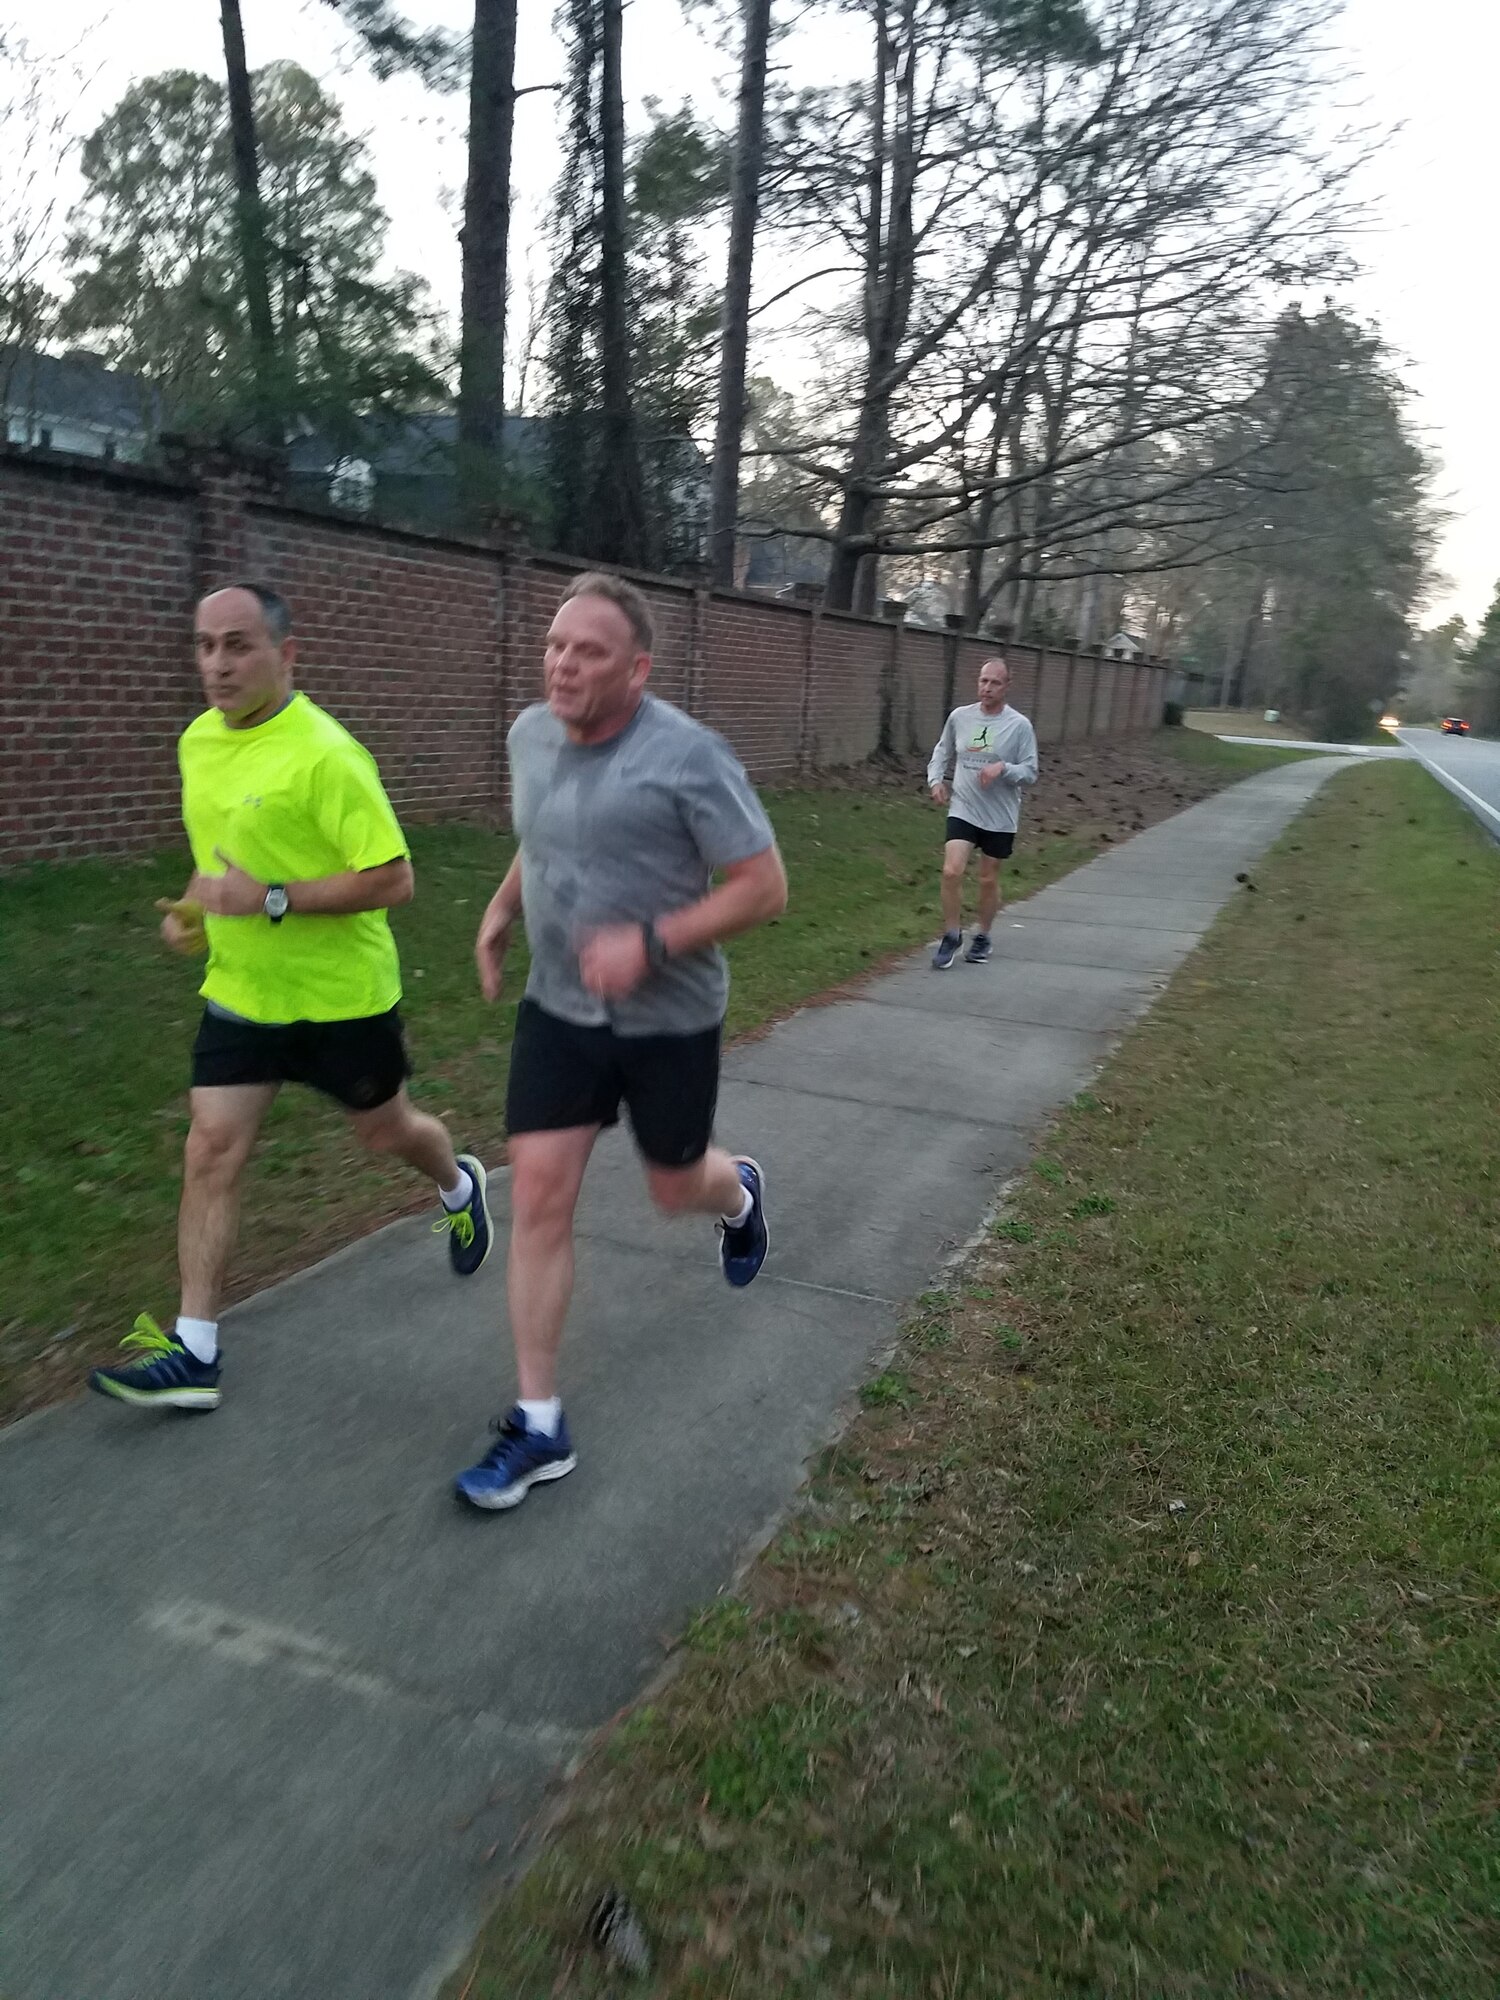 The Red White and Blue running group members race on their four-mile run in Sumter, S.C., Feb. 25, 2019.